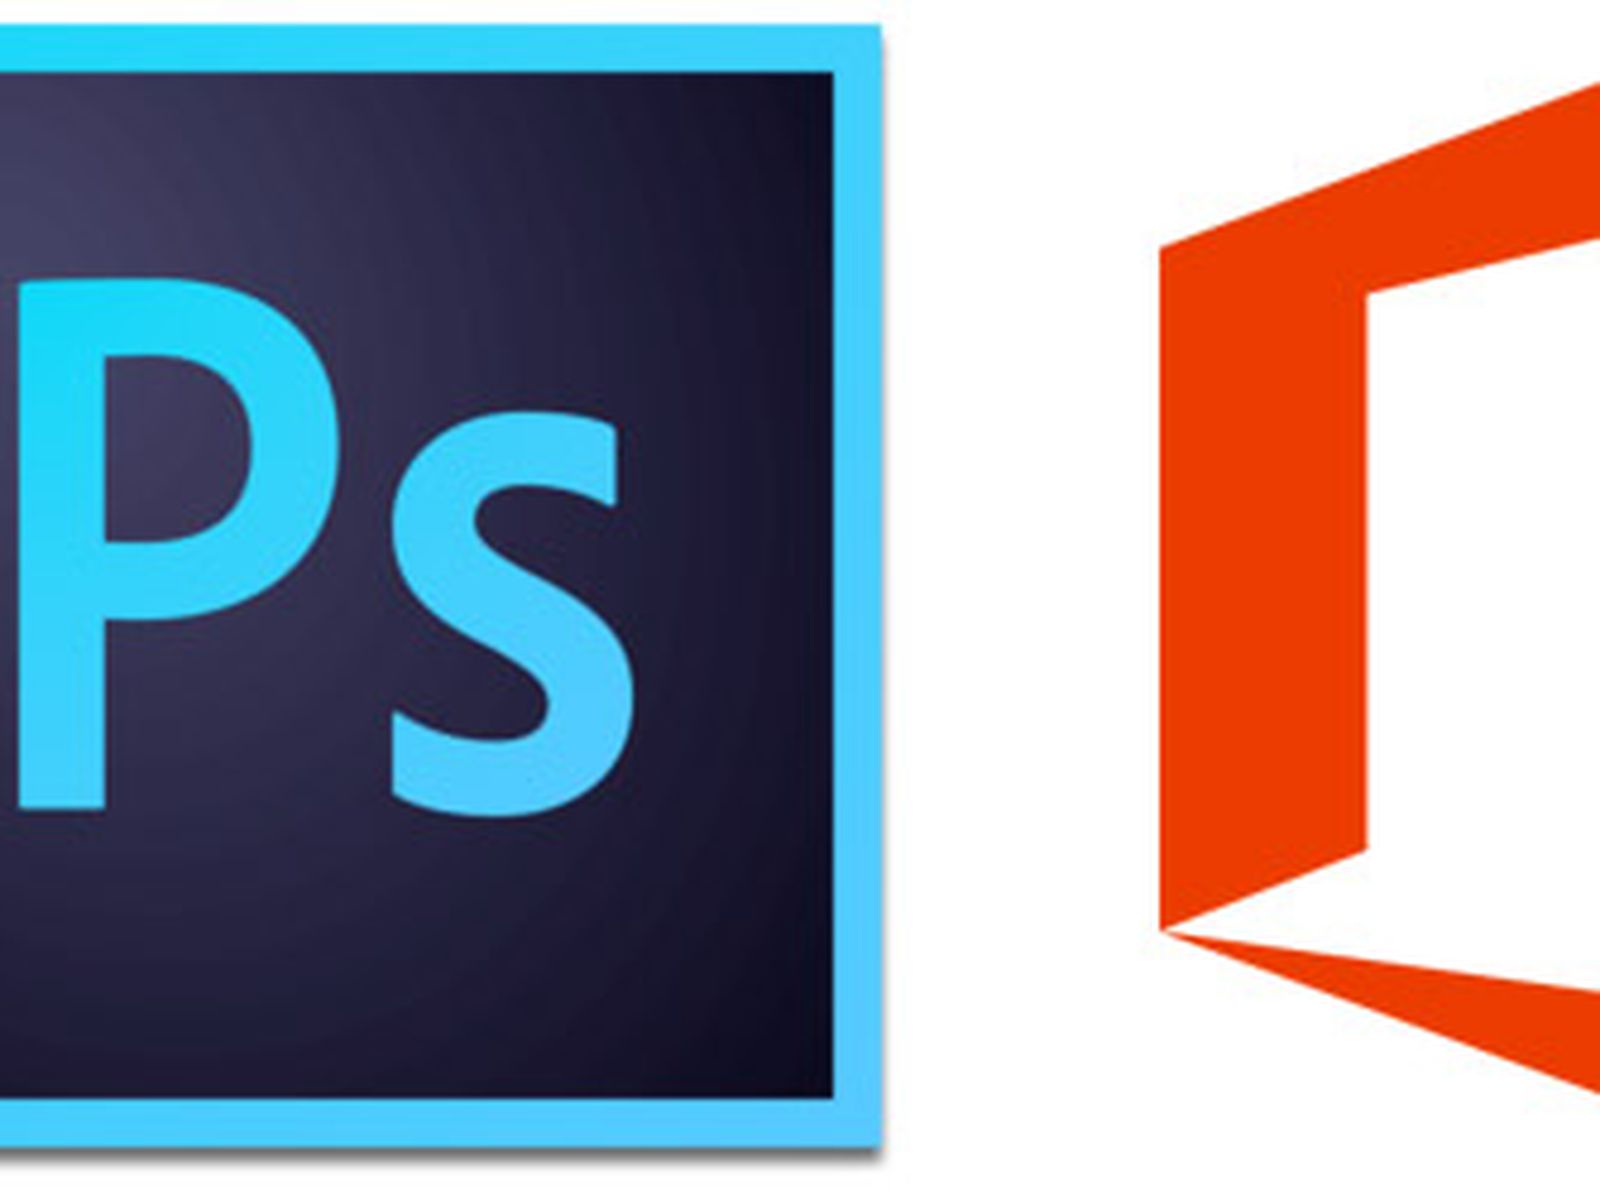 Photoshop and Office 2016 Stability Fixes in the Works for macOS 